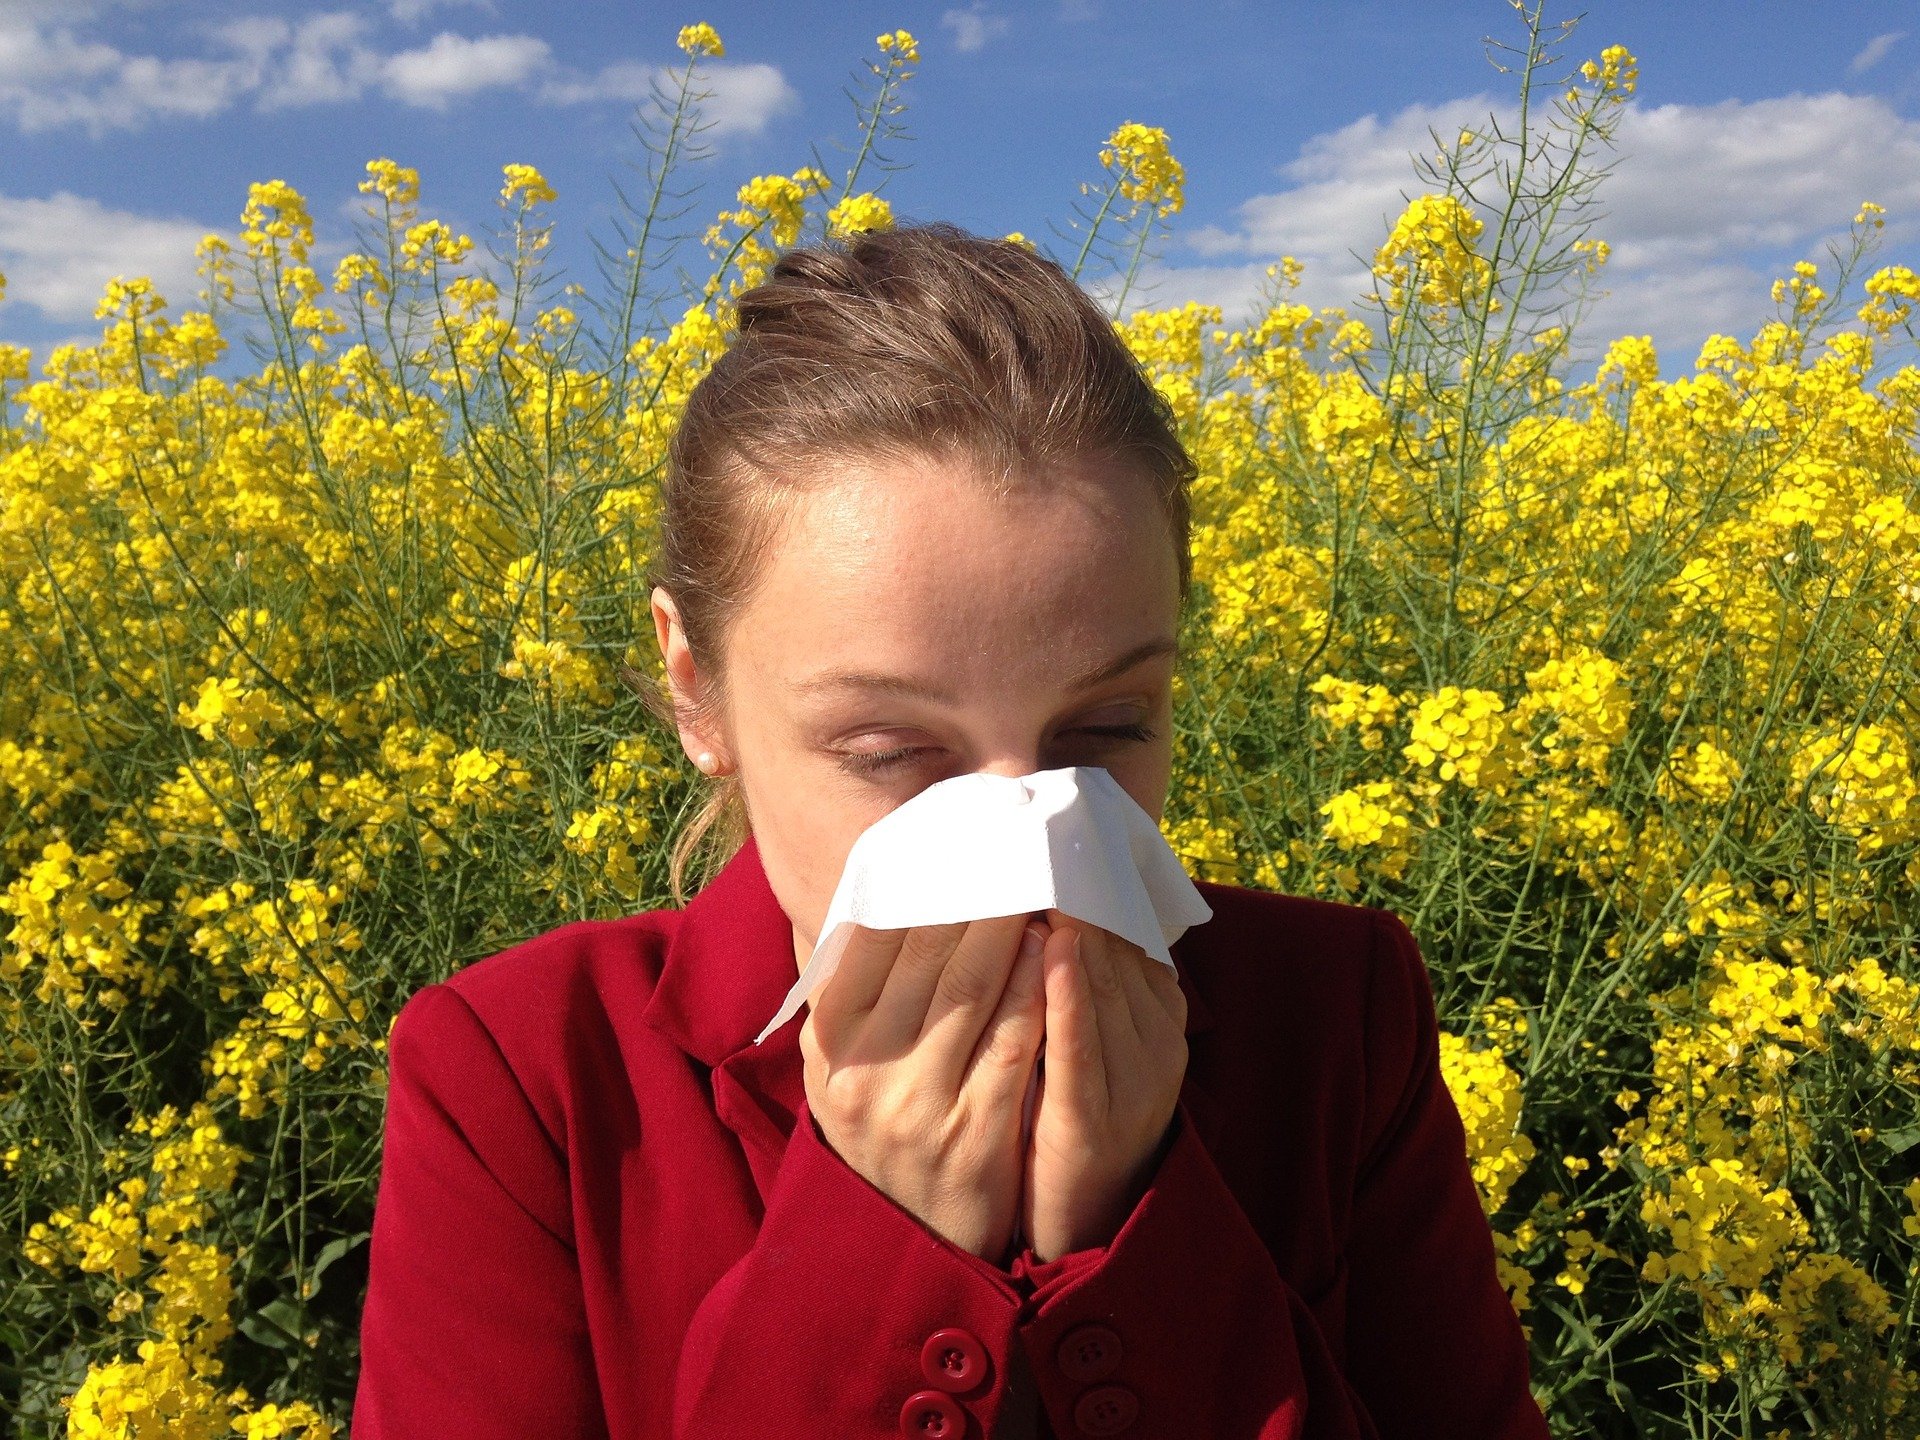 Seasonal allergies: a clear example of bad urban planning